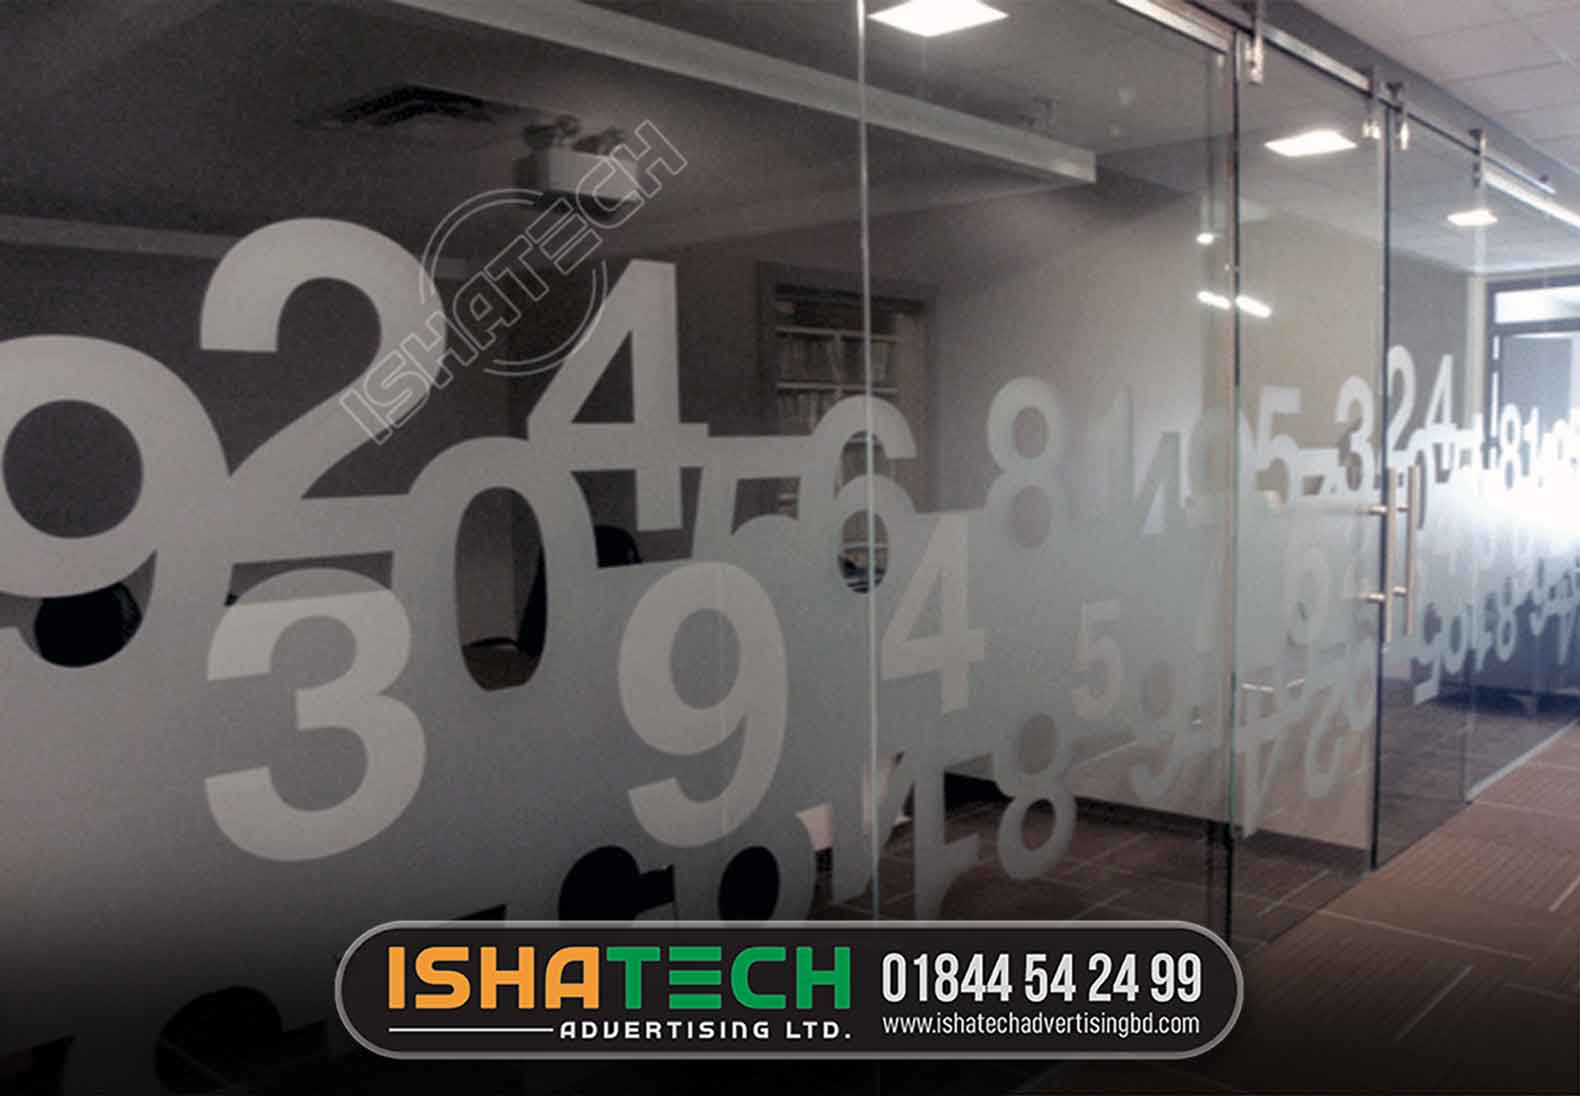 Decals for Glass and Windows, Window Sticker Printing Services that are Beautiful